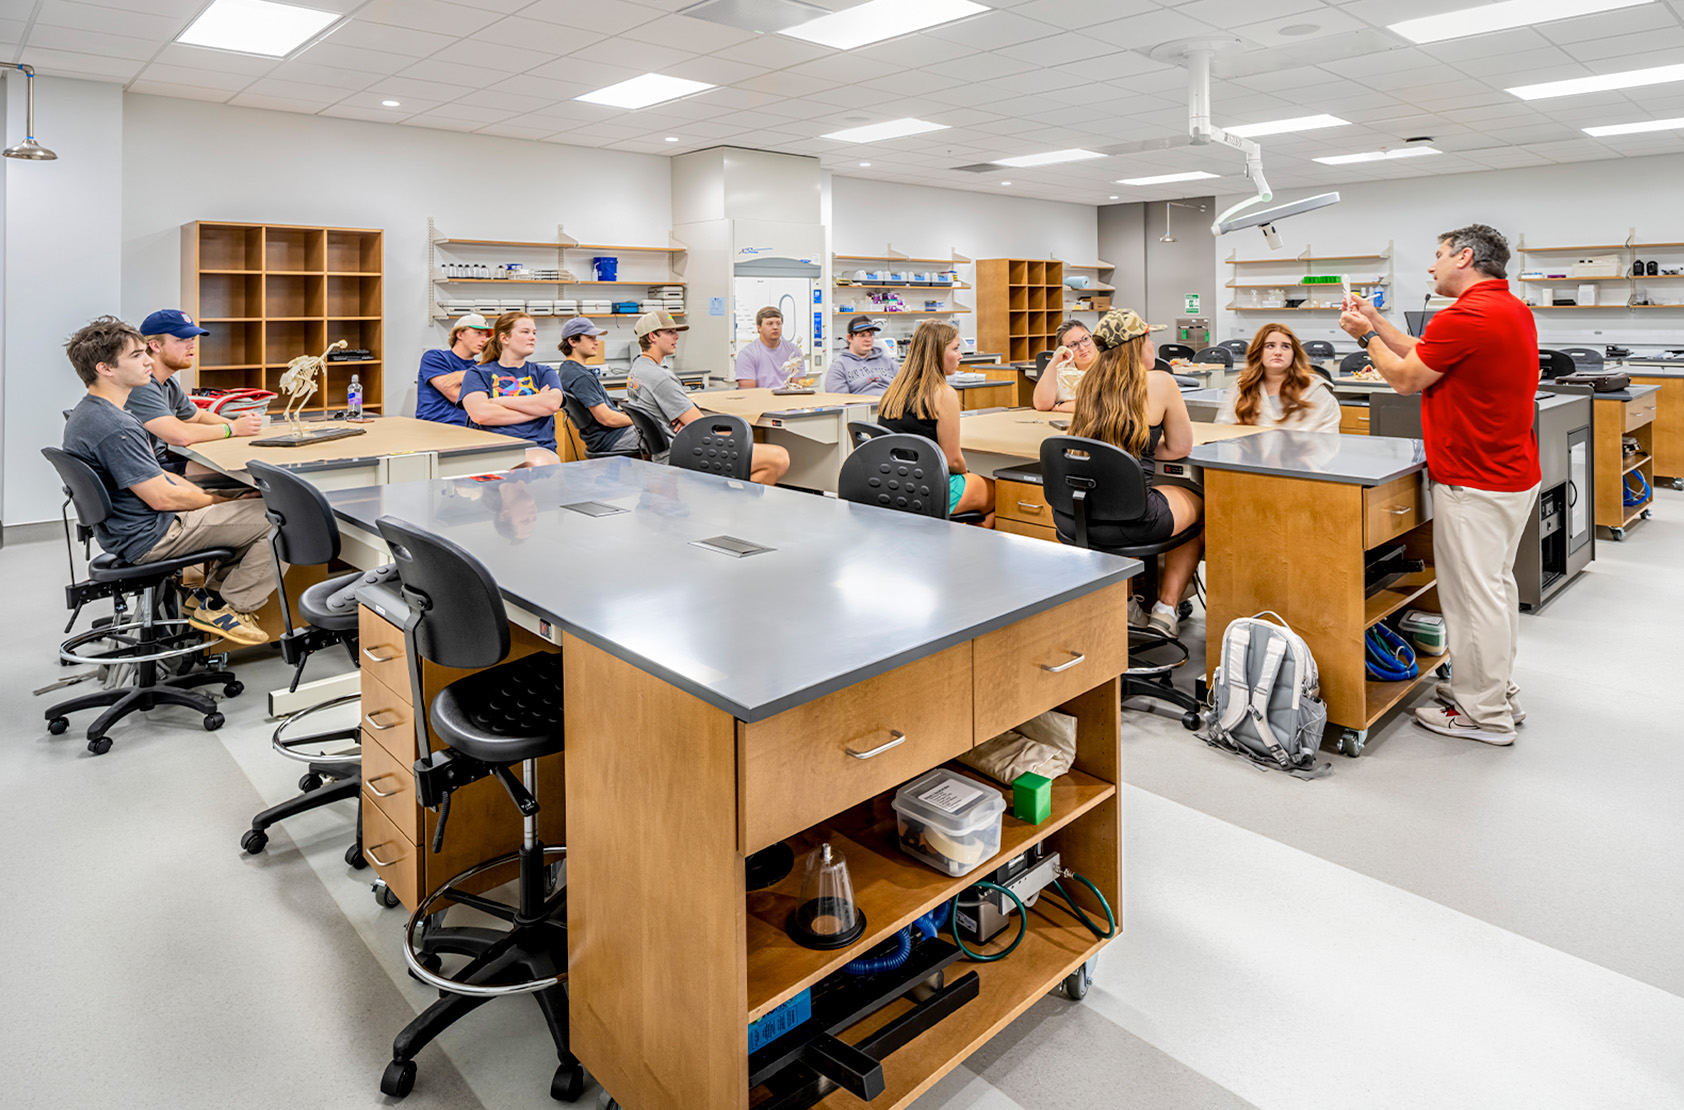 University of Georgia - Poultry Science Complex: Classroom lab with teacher and students